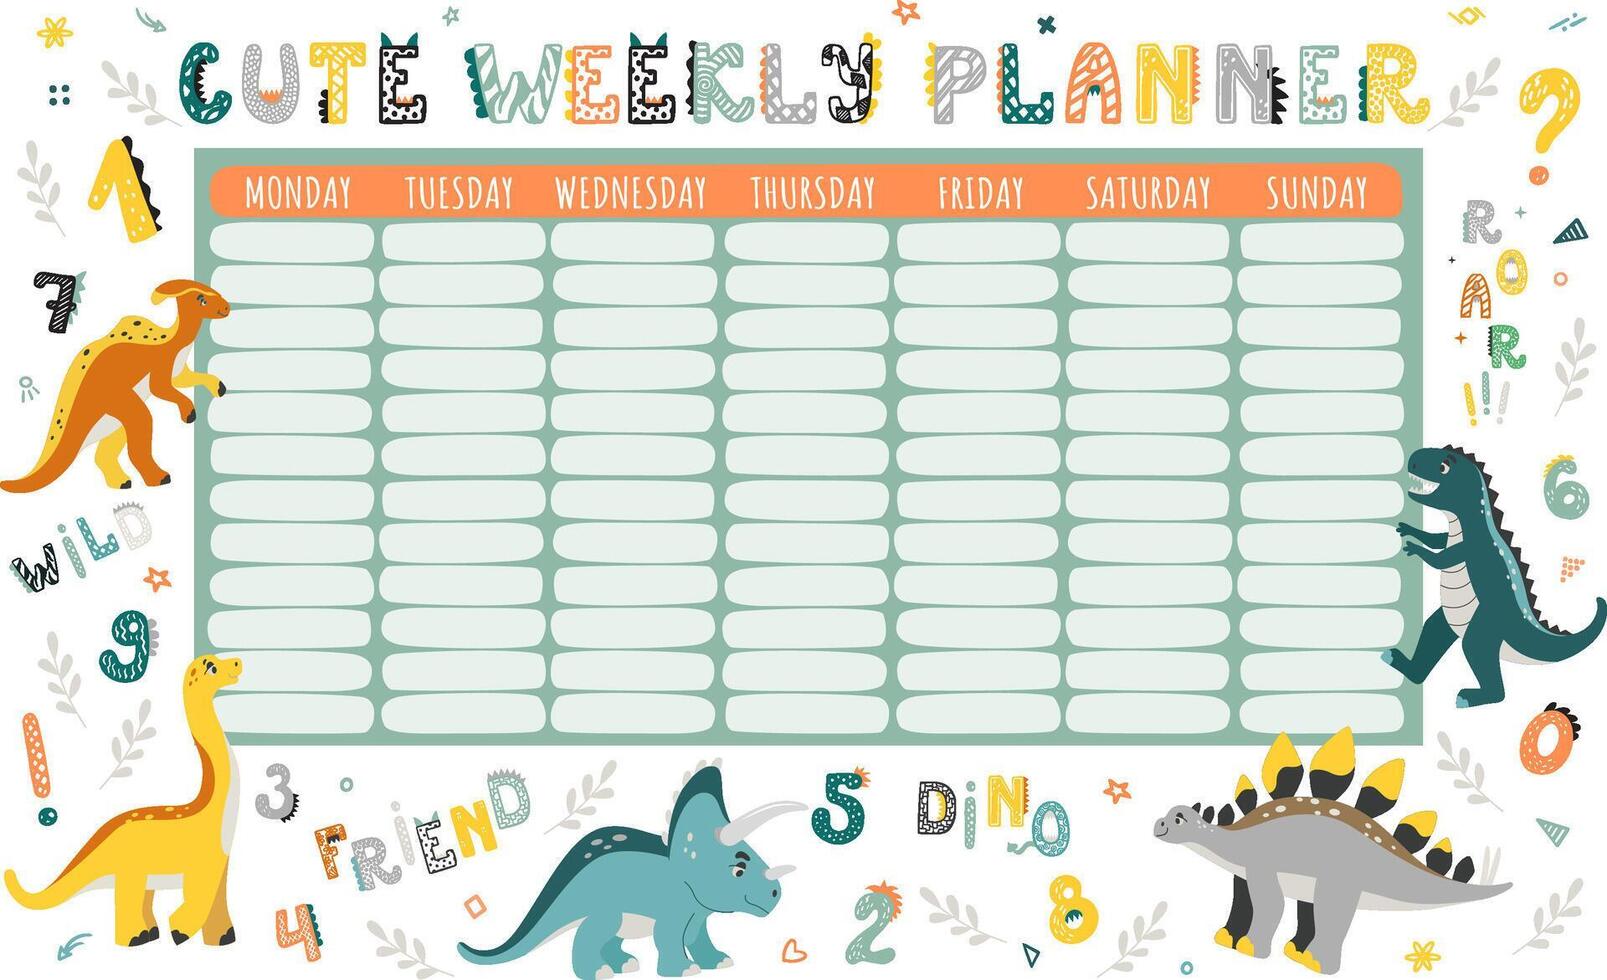 Cute dinosaurs stationery planner for a week and daily organizer for kids, Monday to Sunday schedule. colorful illustrations of various funny dino in simple scandinavian cartoon style vector